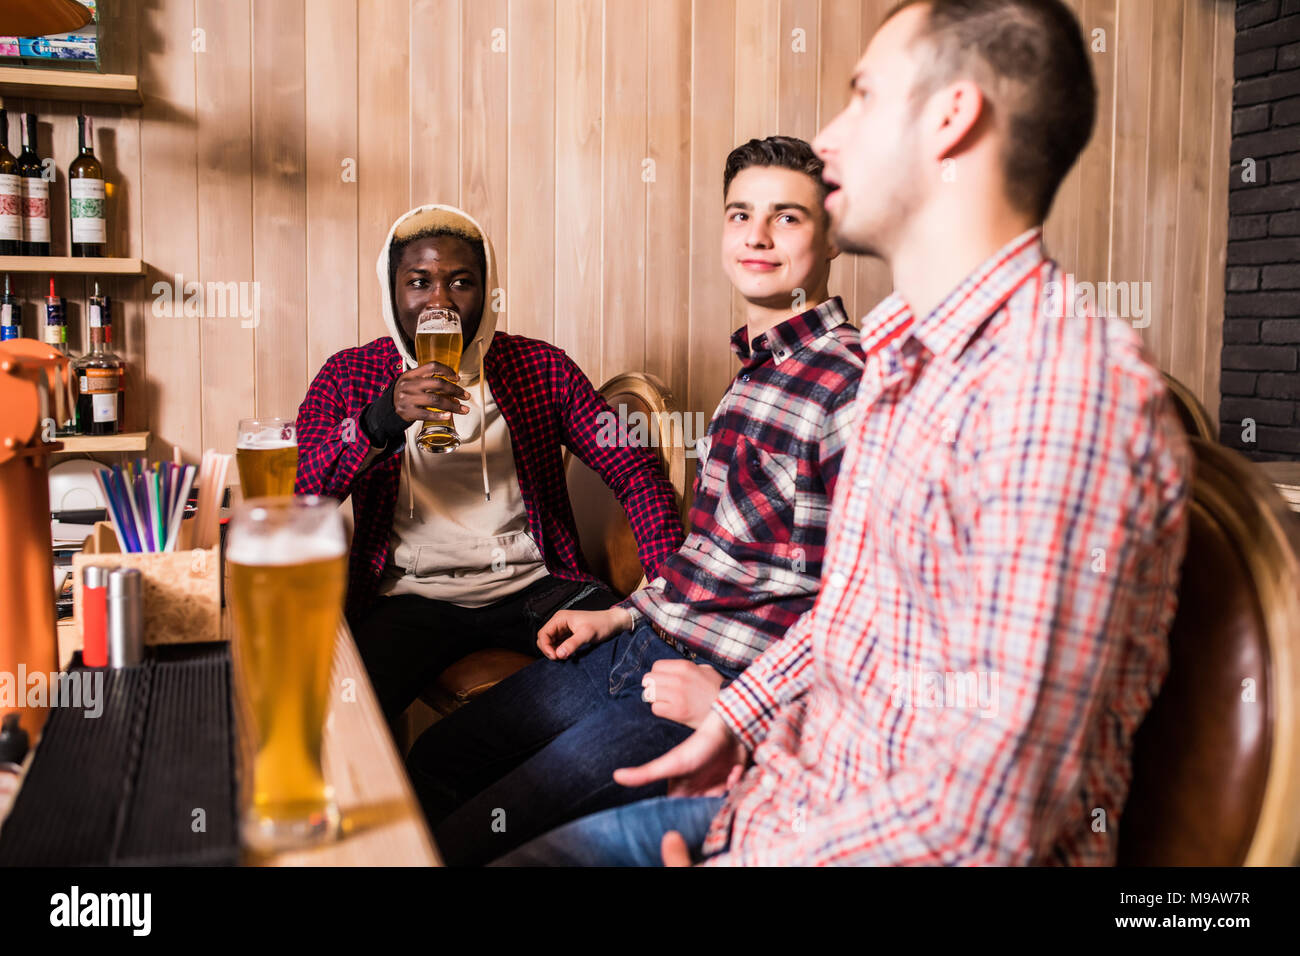 Three young men in casual clothes are smiling drinking beer while ...